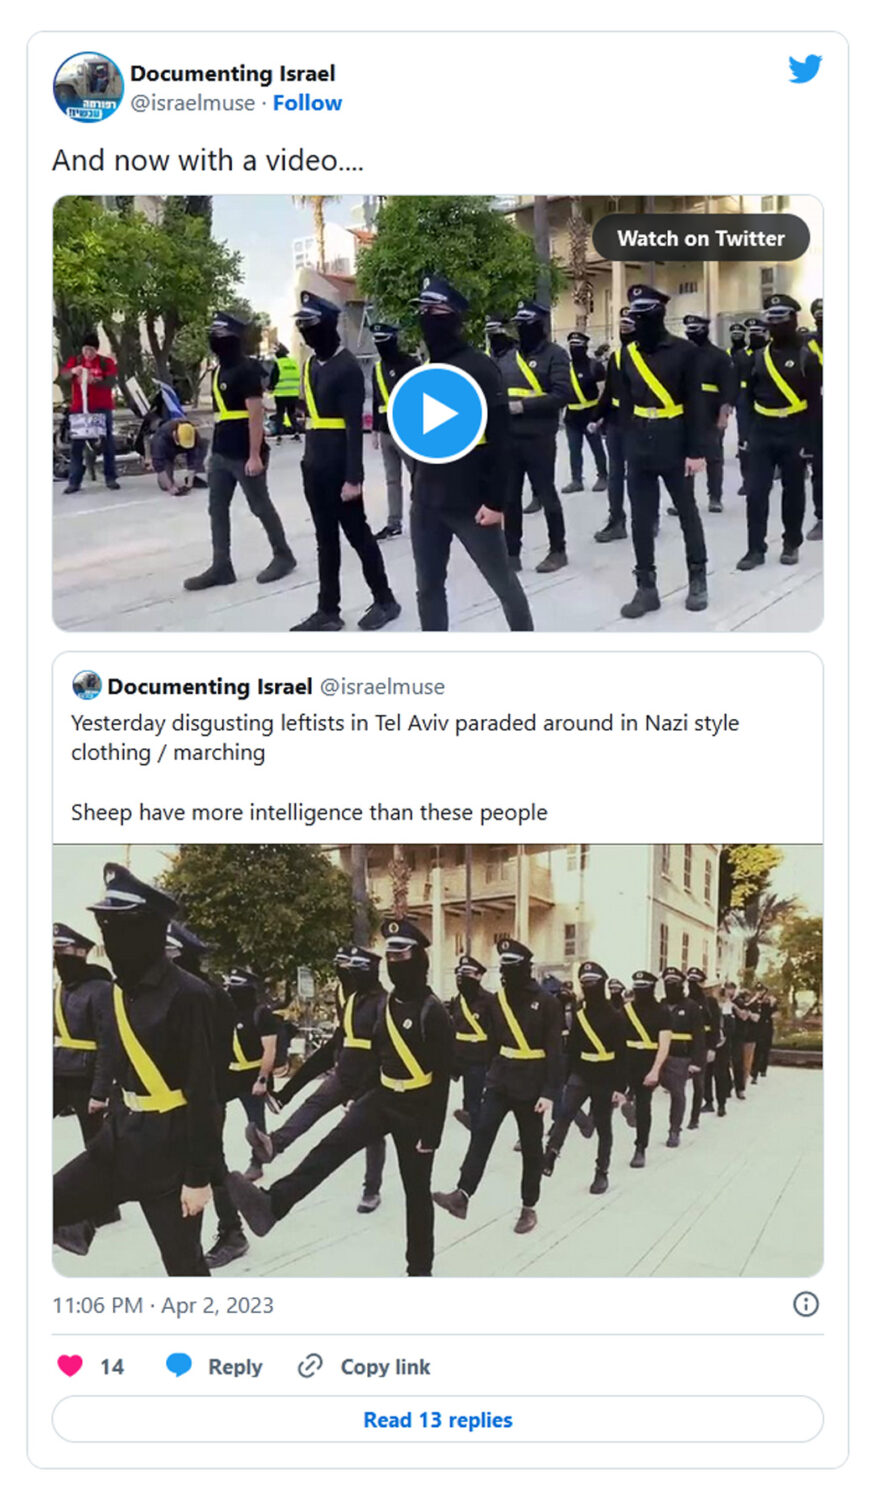 Documenting Israel-tweet-2april2023-Yesterday disgusting leftists in Tel Aviv paraded around in Nazi style clothing